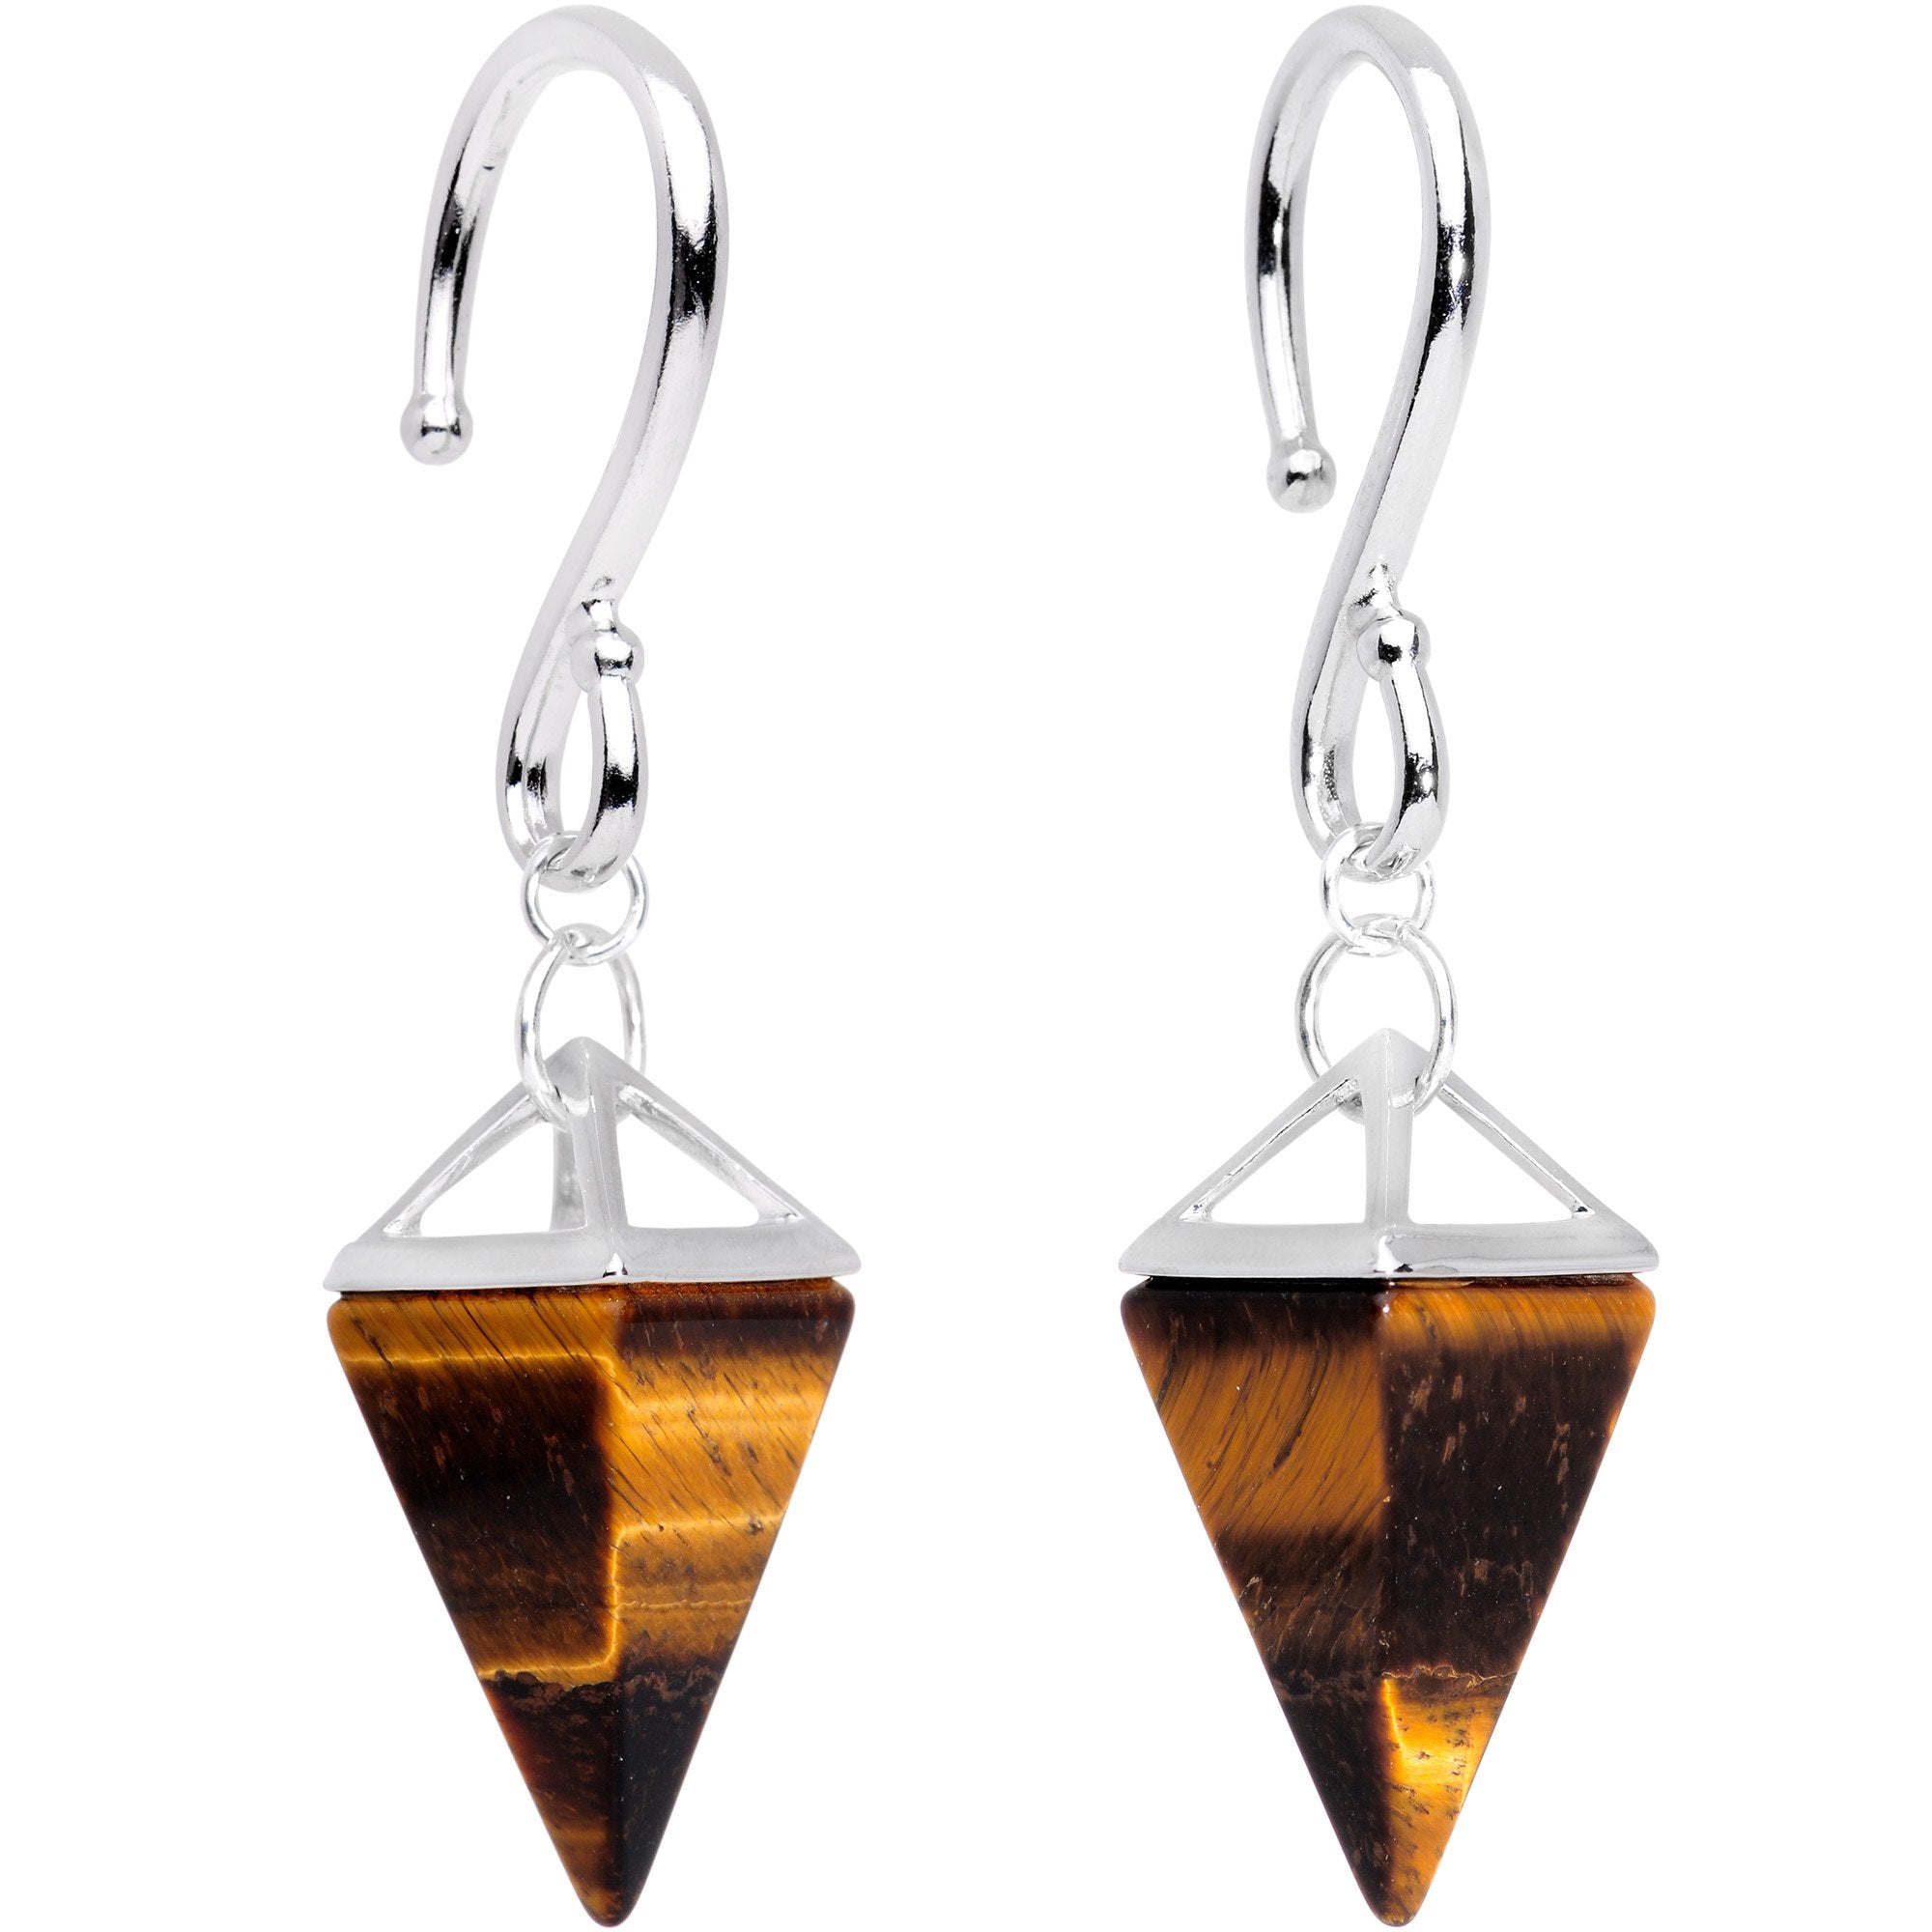 Handcrafted Silver Plated Tiger Eye Stone Pyramid Ear Weights